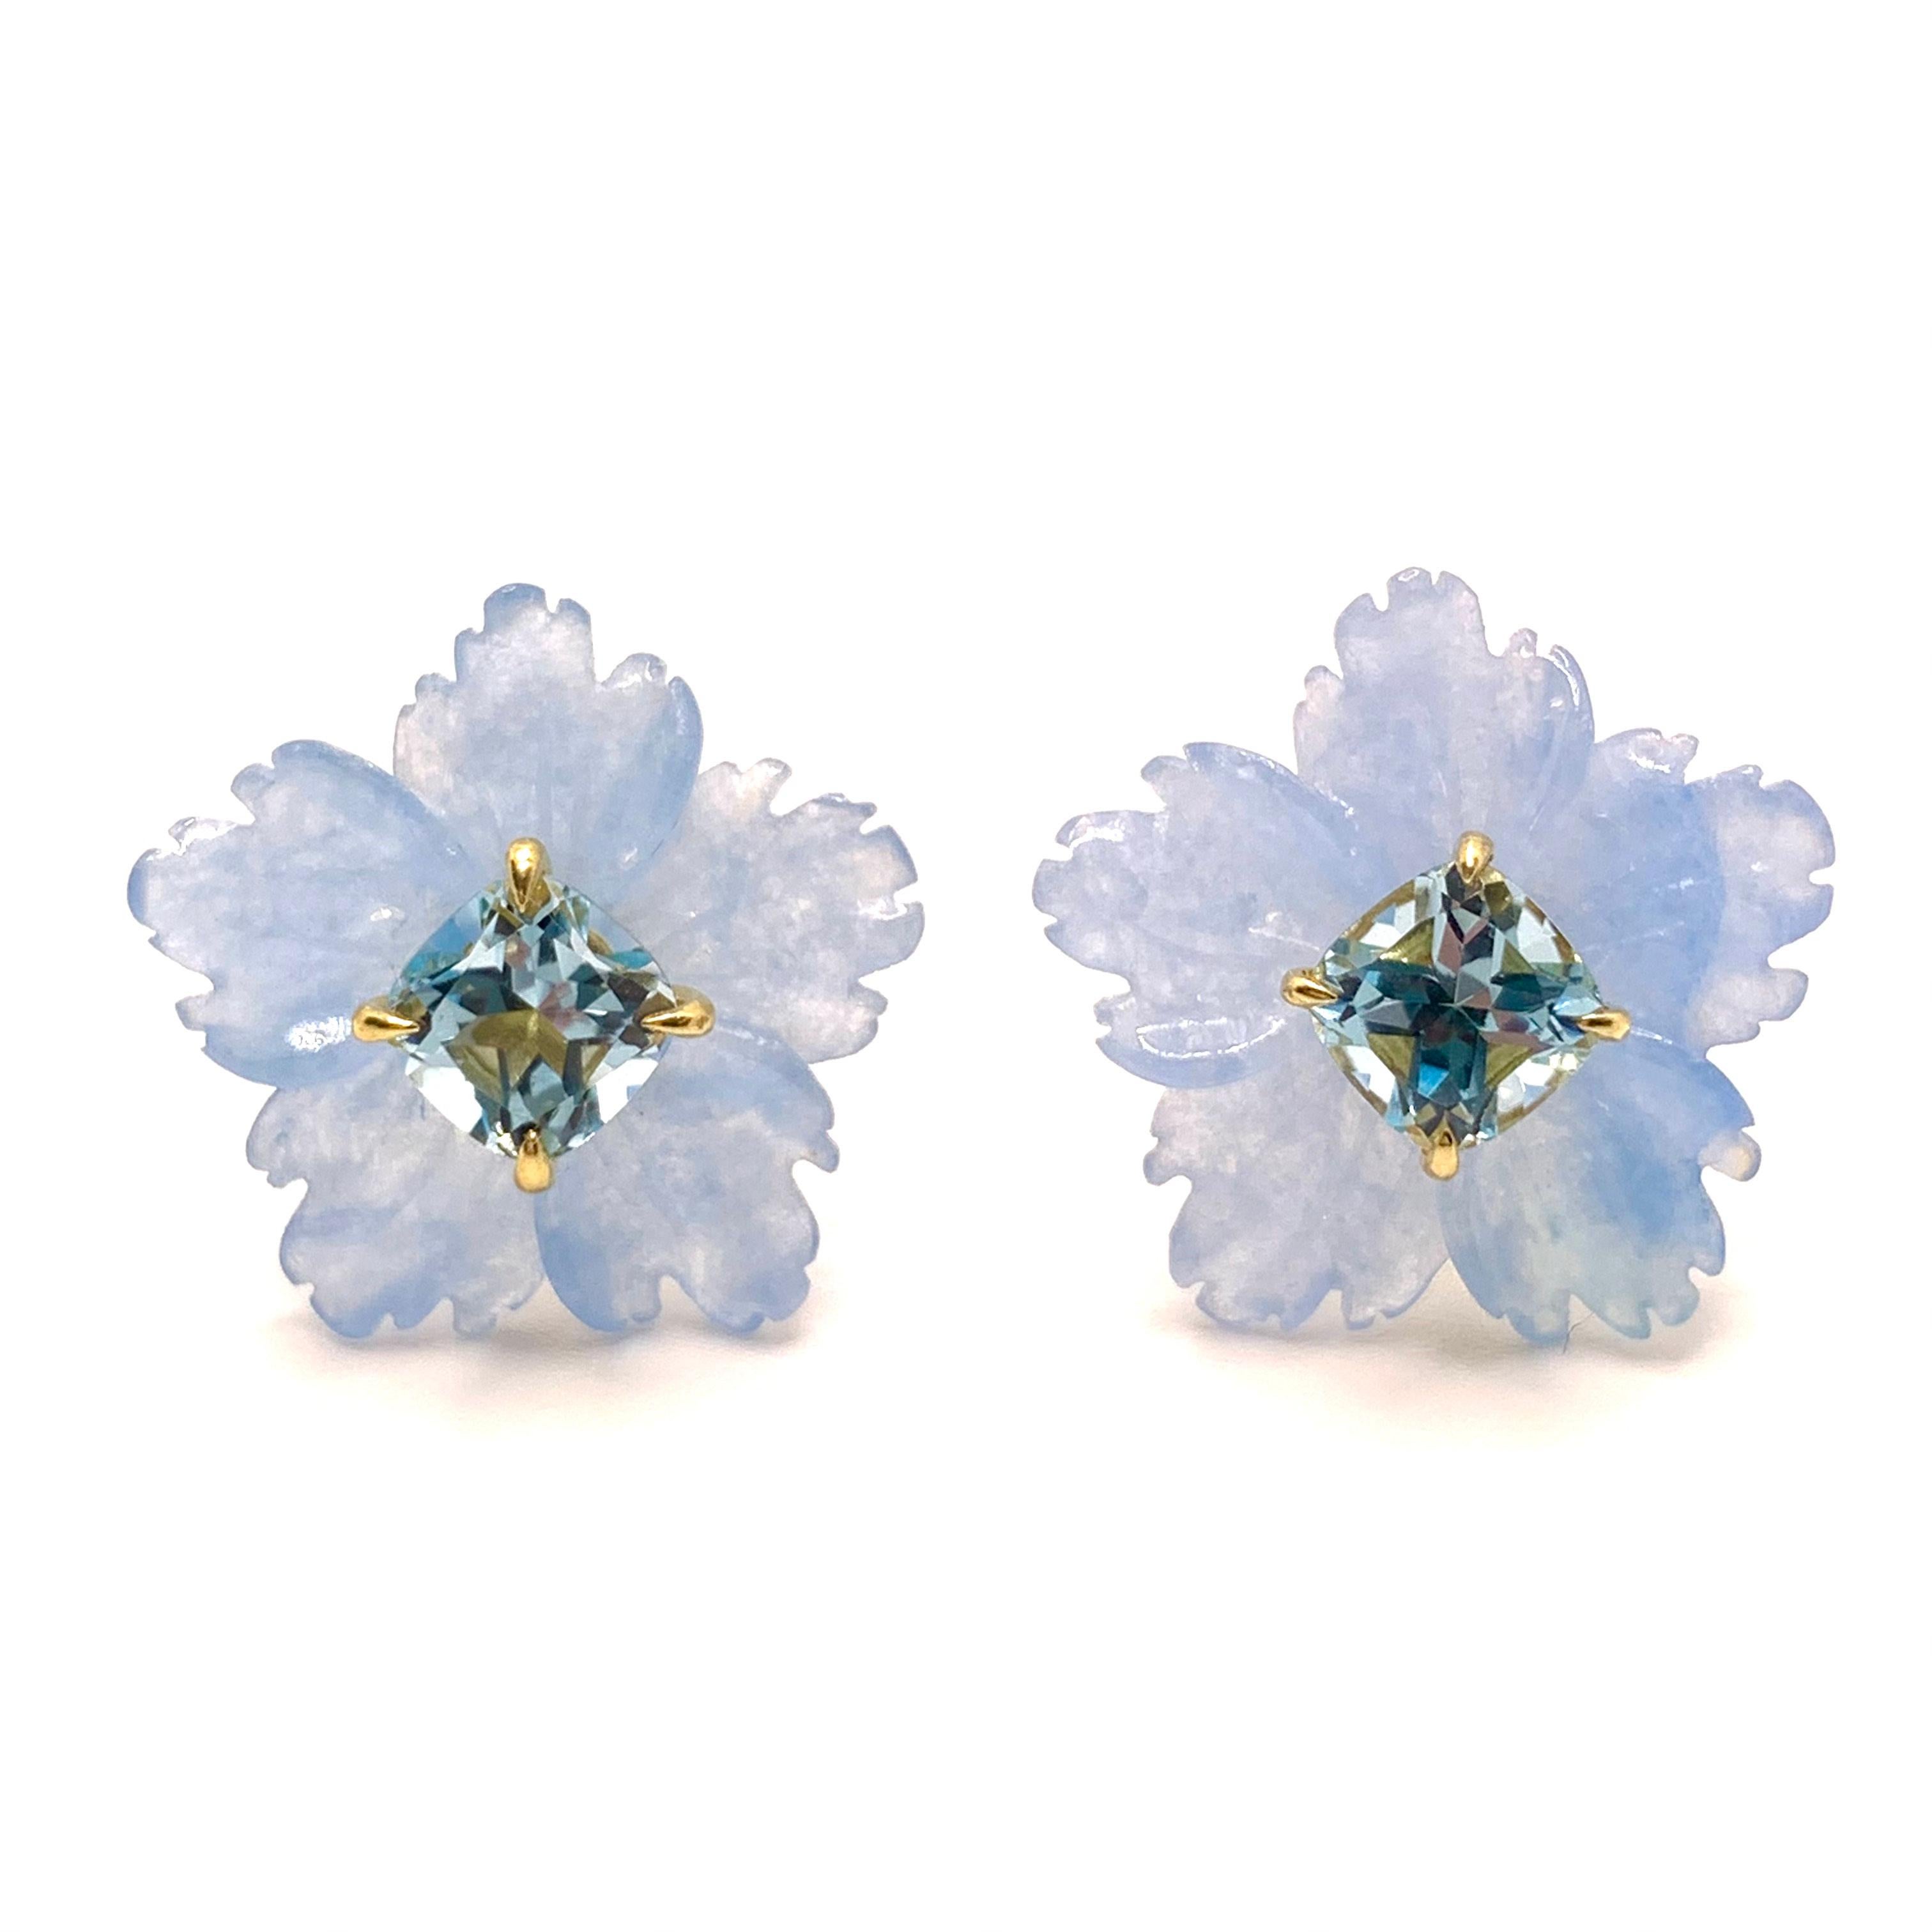 Bijoux Num's 18mm Carved Blue Quartzite Flower and Cushion Blue Topaz Vermeil Earrings

This gorgeous pair of earrings features 18mm blue quartzite carved into beautiful three dimension flower, adorned with genuine cushion-cut sky blue topaz (~1